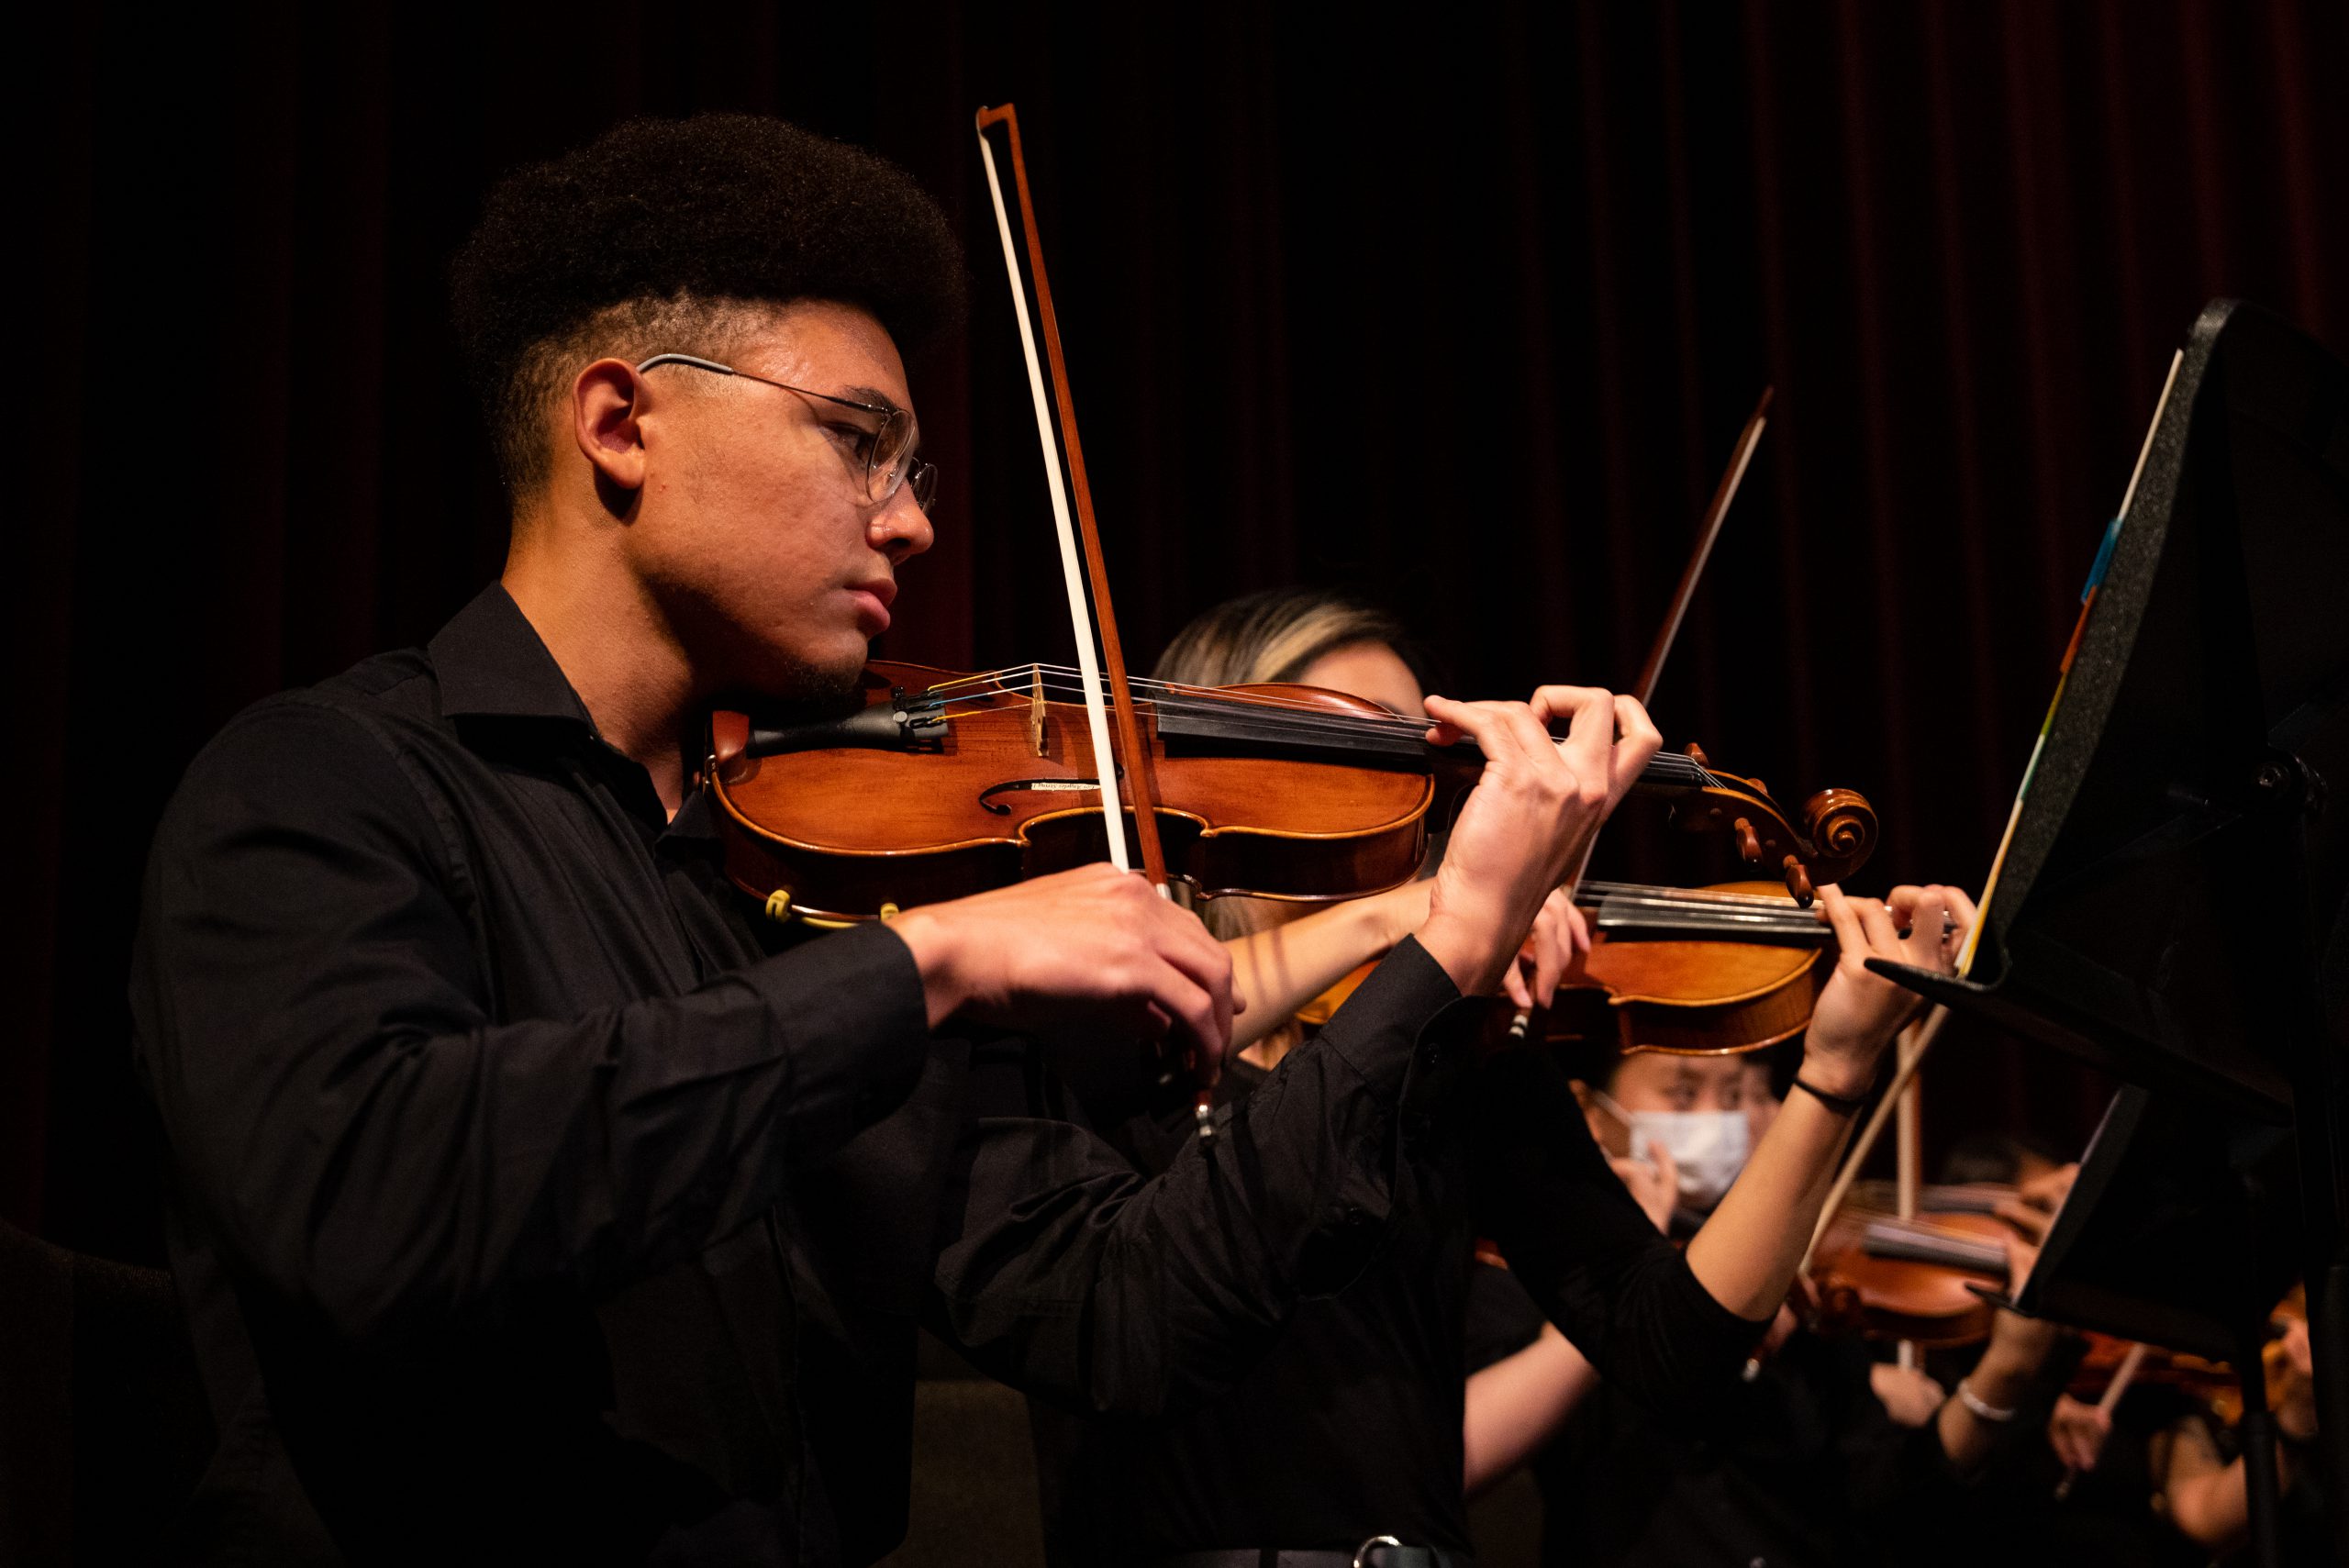 Student plays violin during an orchestra performance